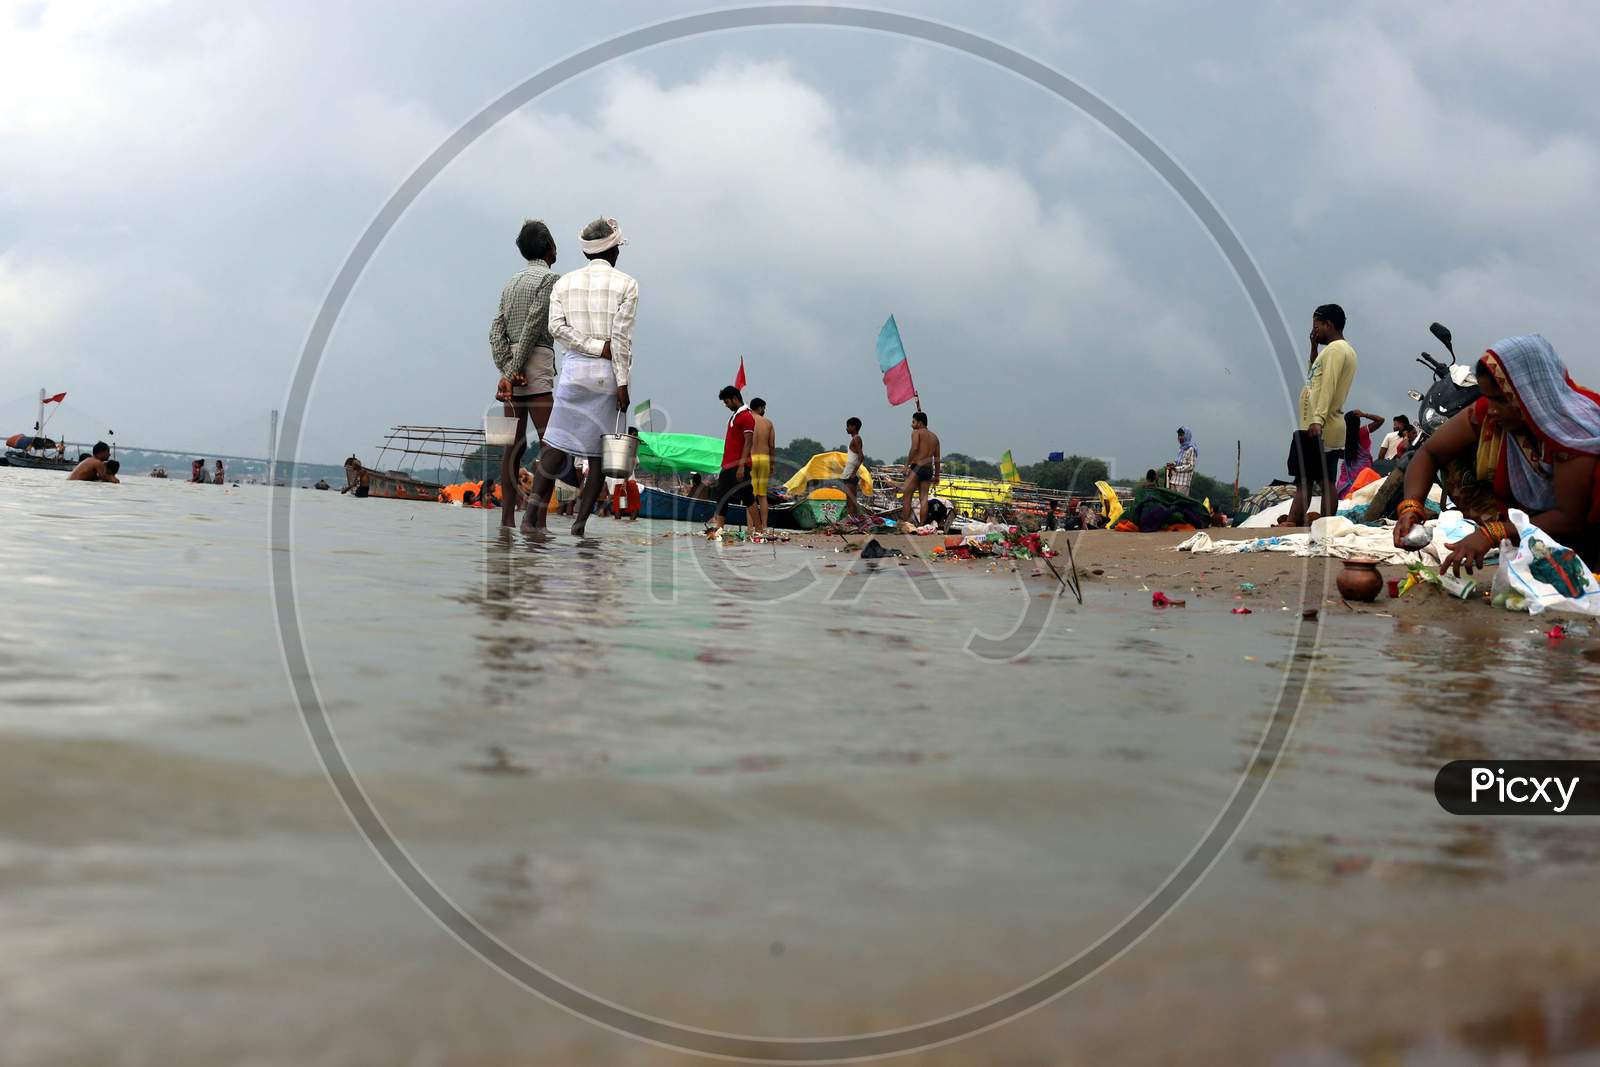 People stand ashore of River Ganga which witnessed an increase in its water level due to heavy rainfall in Prayagraj, Uttar Pradesh on July 07, 2020